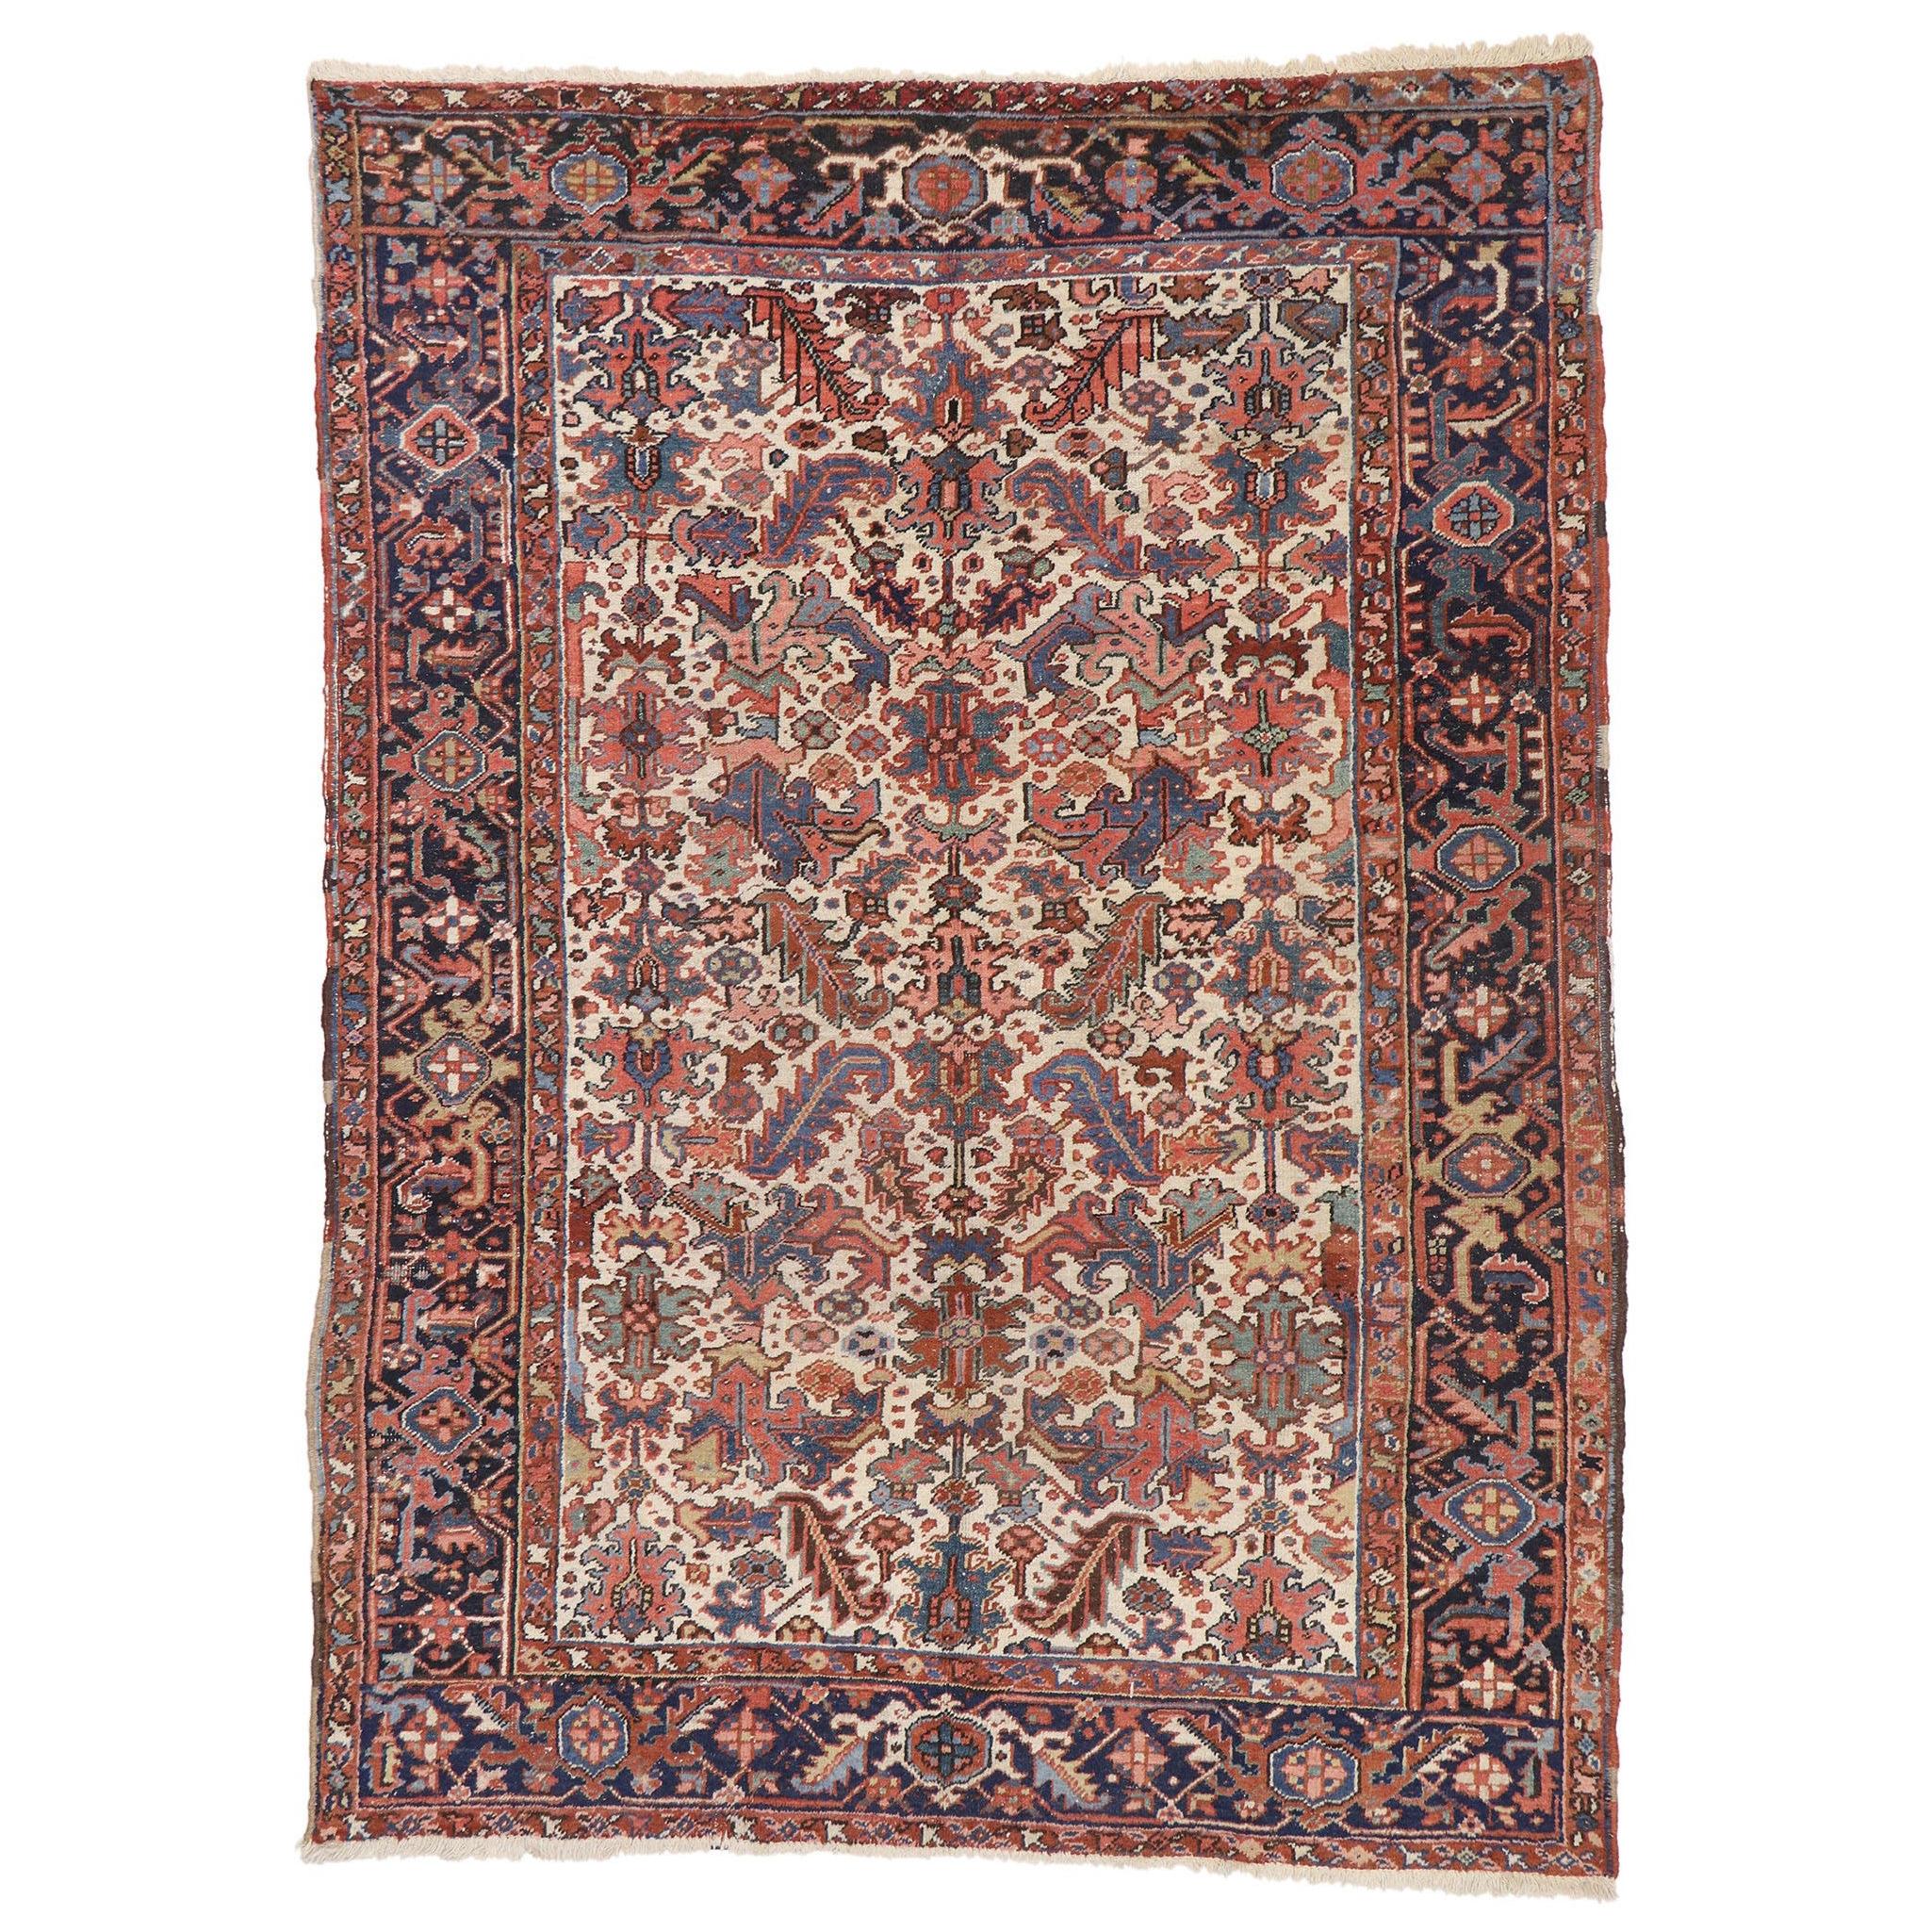 Antique Persian Heriz Dragon Rug with Mid-Century Modern Style